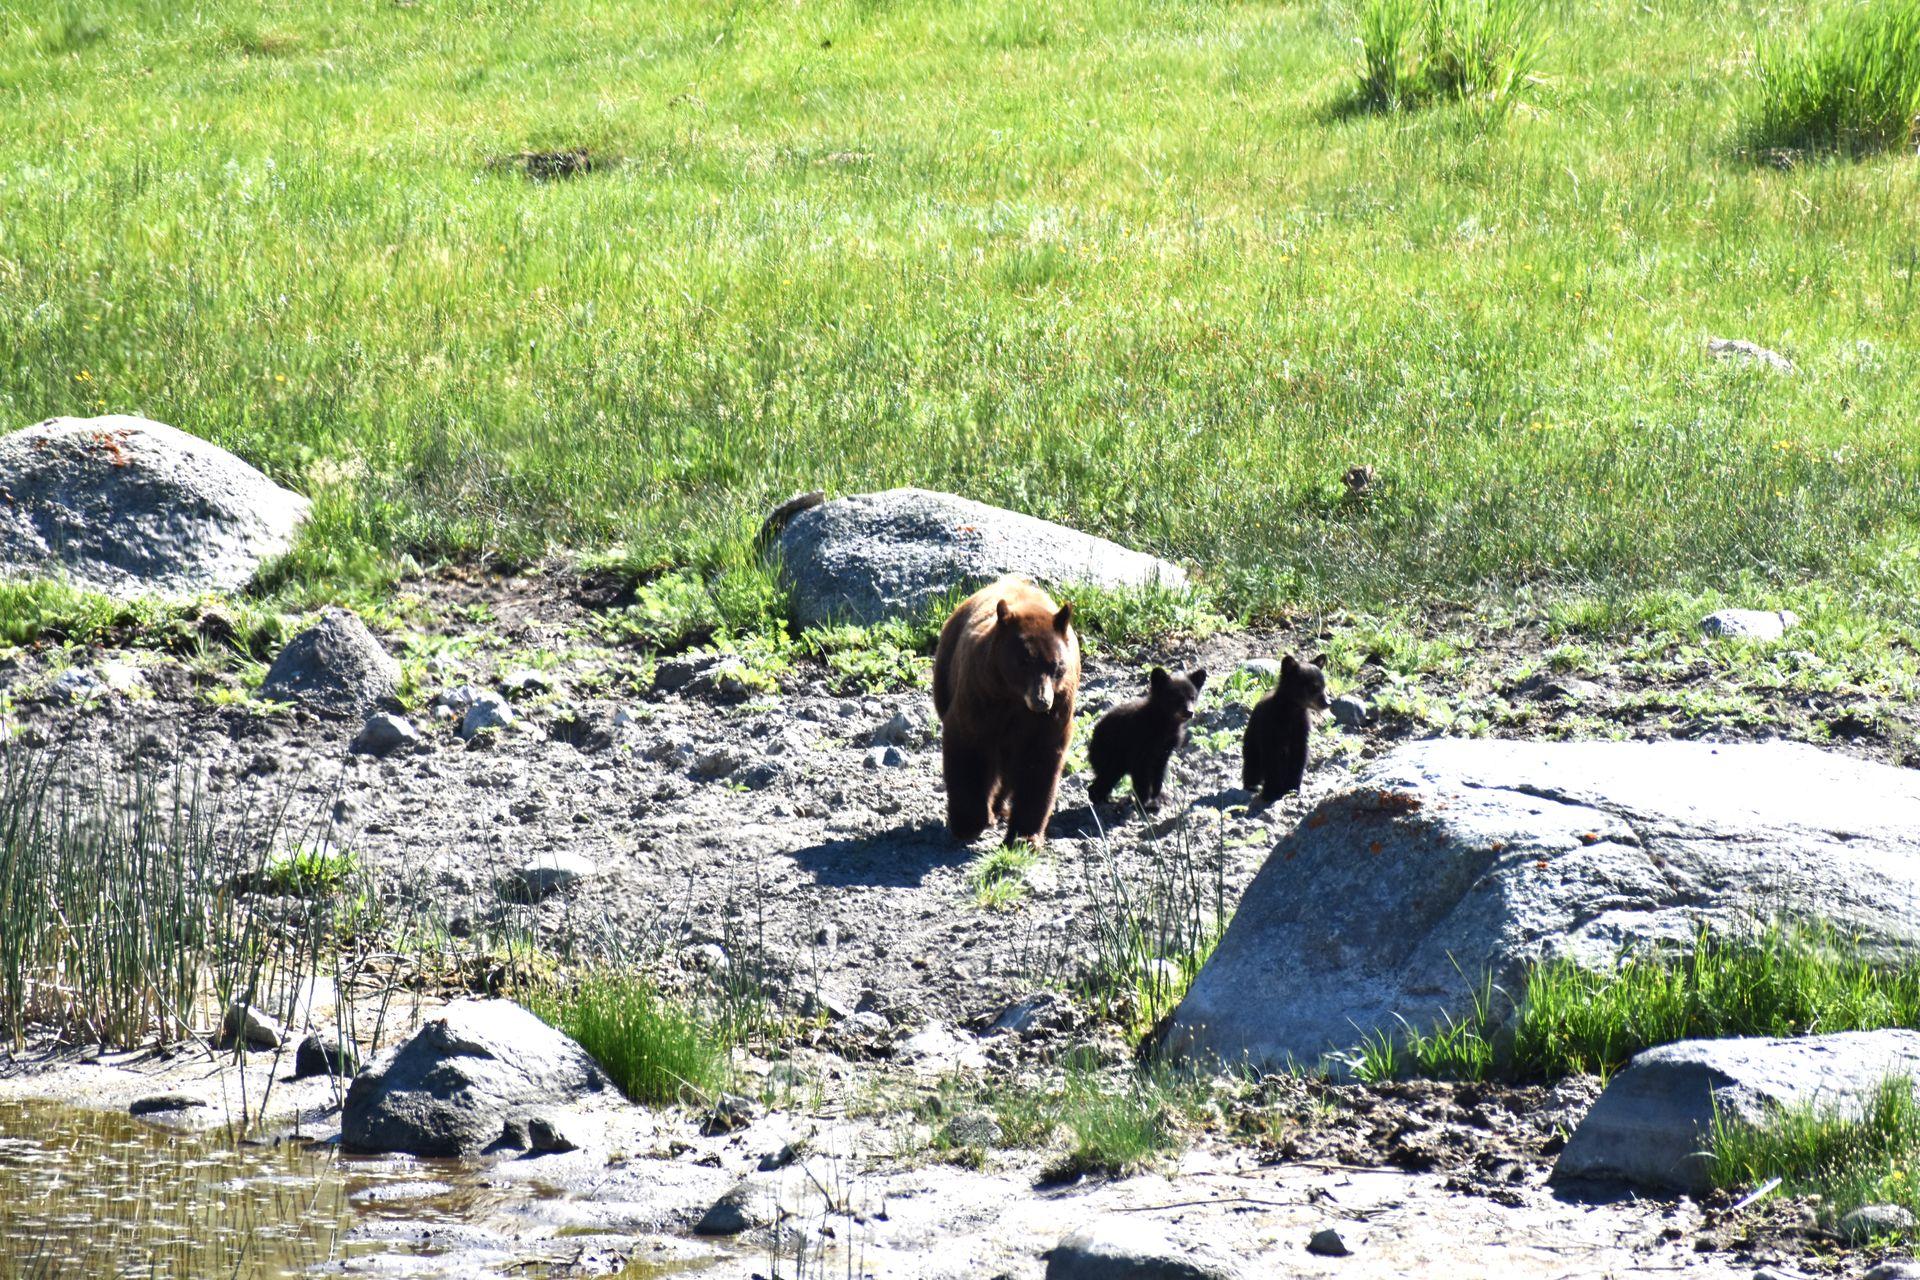 A mama and two baby bears walking in Yellowstone.